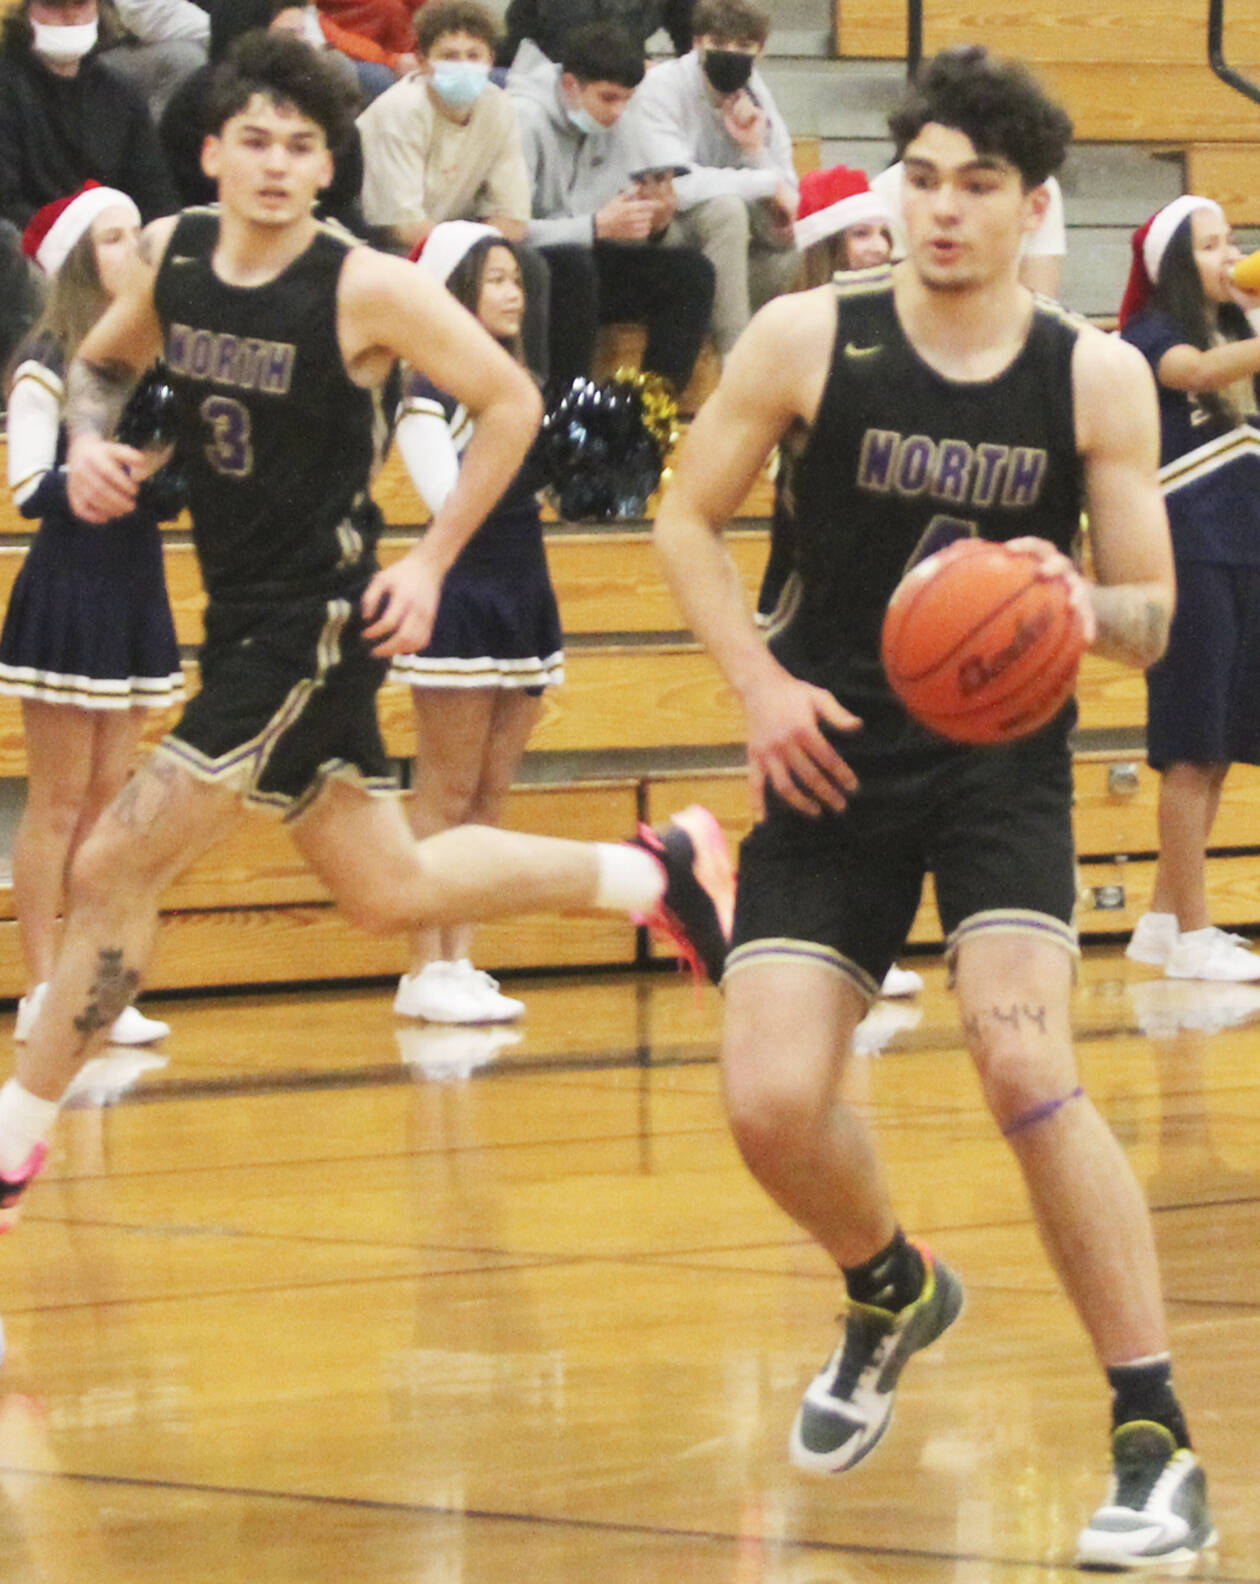 Jonas La Tour dribbles down the court while Aiden Olmstead fills the outside lane. Steve Powell/File Photos